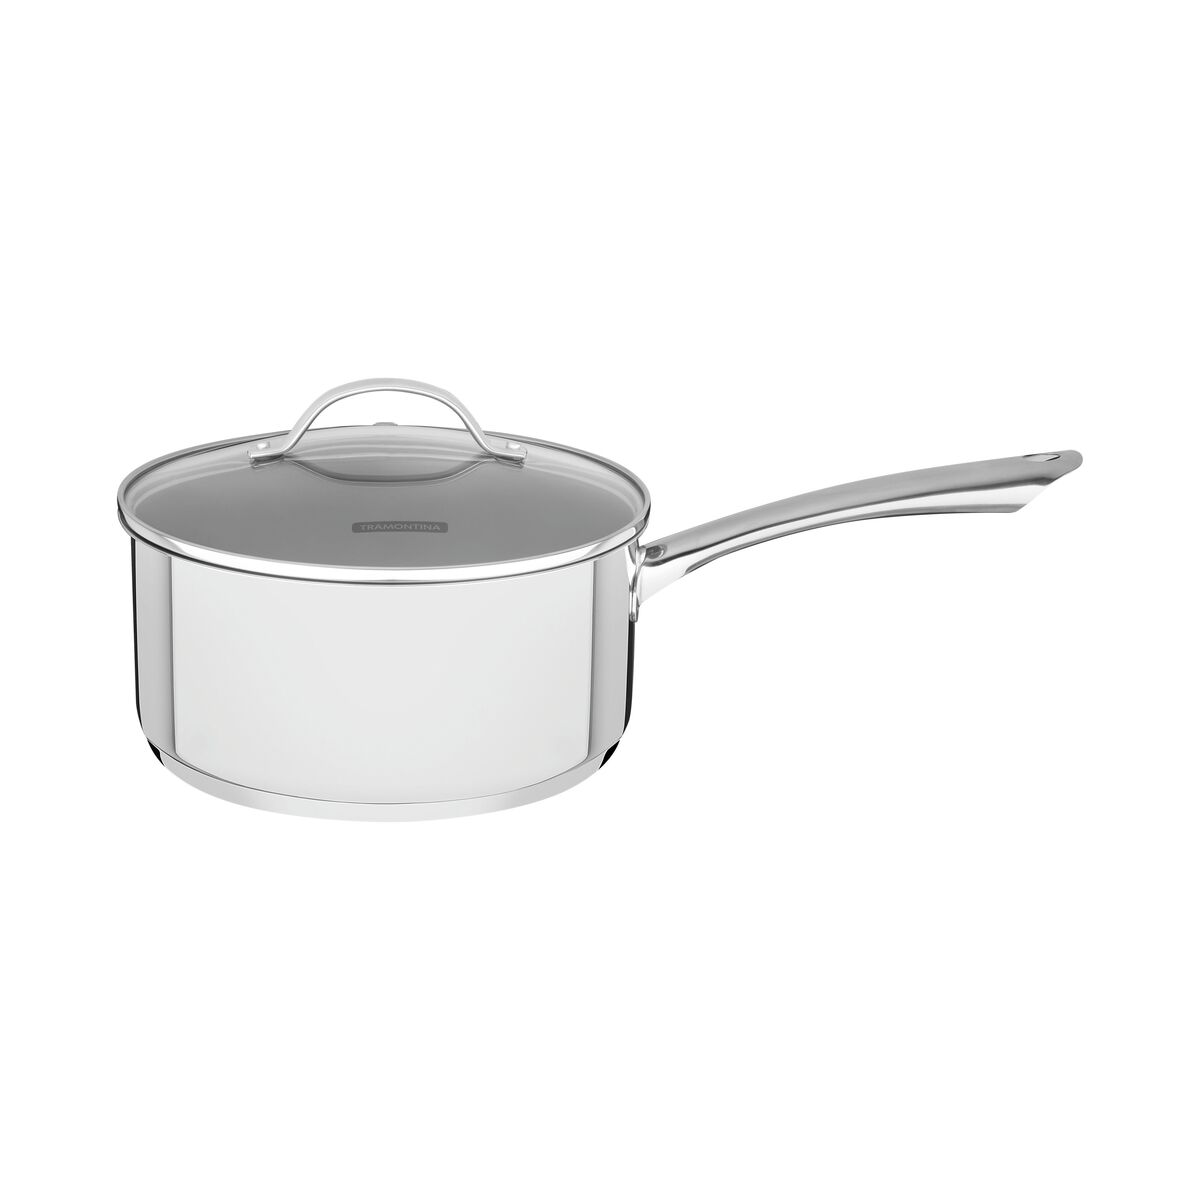 Tramontina Una stainless steel saucepan with tri-ply base and glass lid, 16 cm and 1.4 L